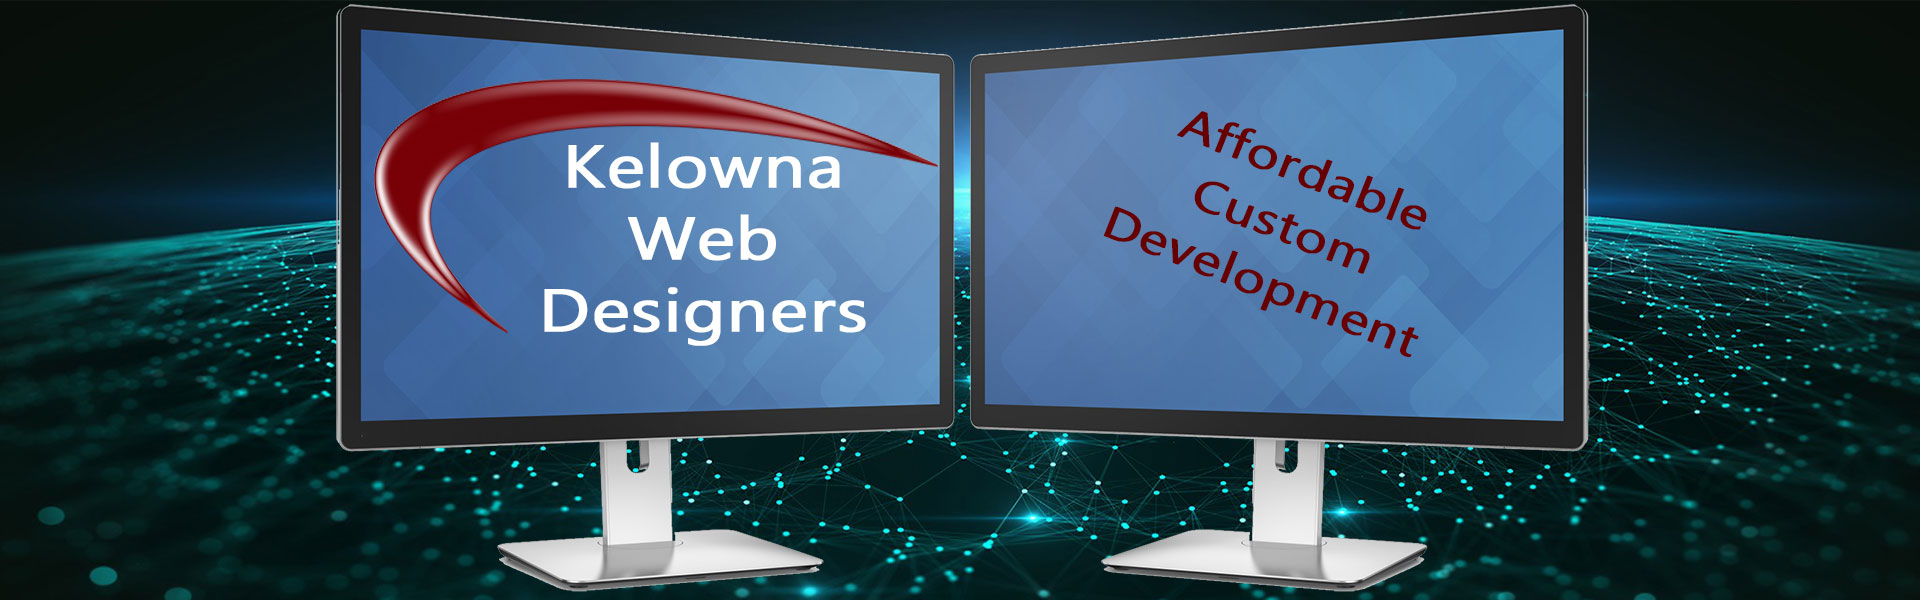 We are professional Kelowna Web Designers serving Canadian businesses since 1996.